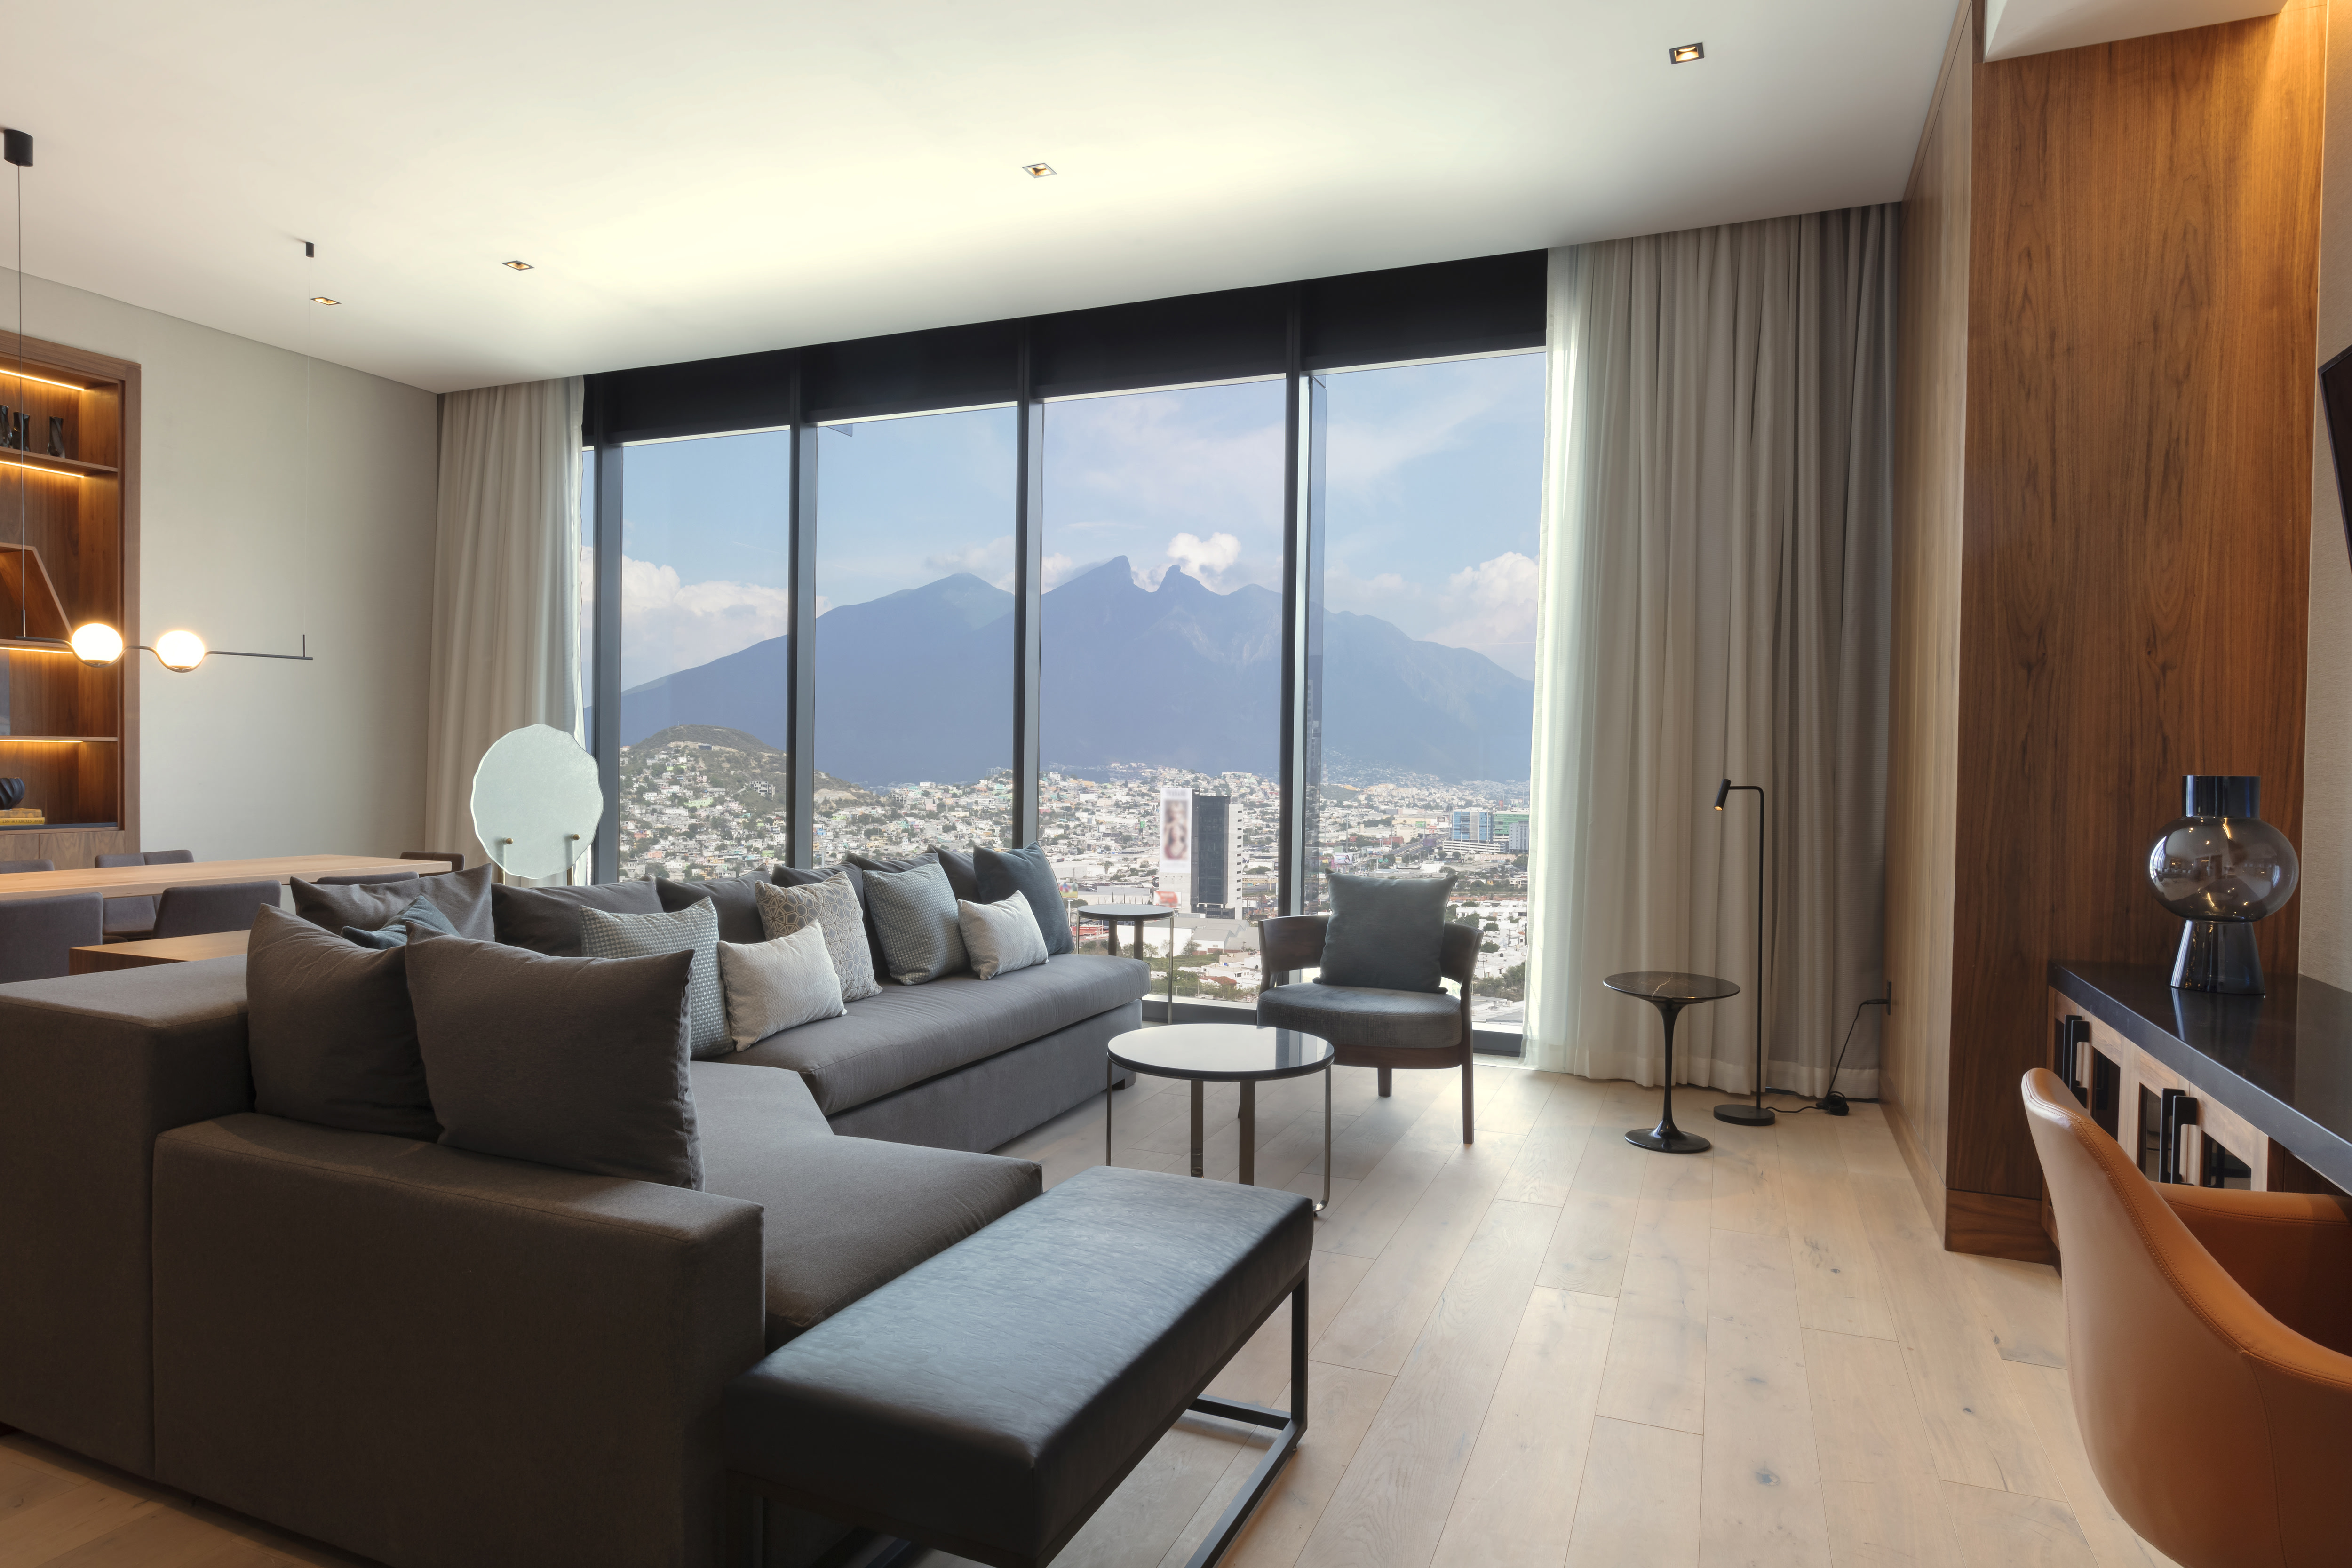 Suite living room with large sofa, dining table for 8 and floor-to-ceiling windows with views of mountains and city